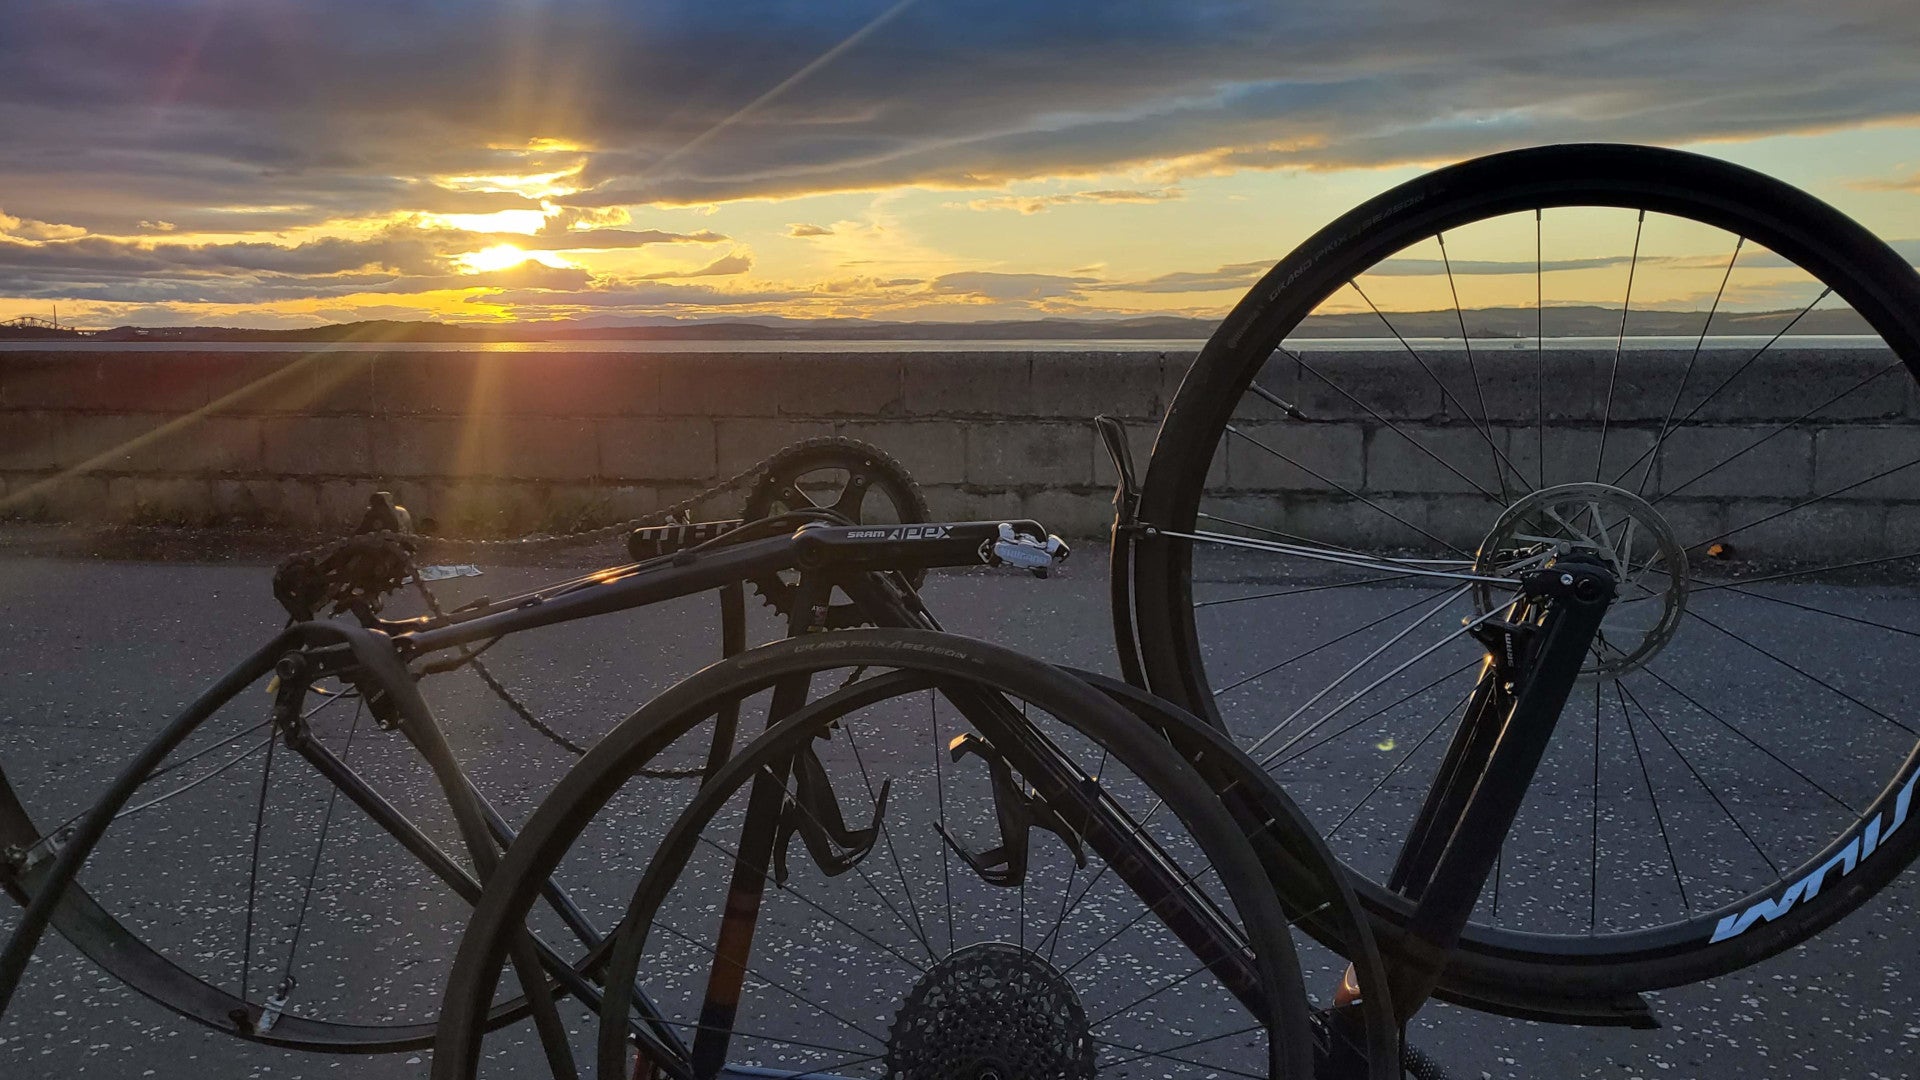 A photo of an upside-down bicycle with the back wheel off, backlit by a sunset.